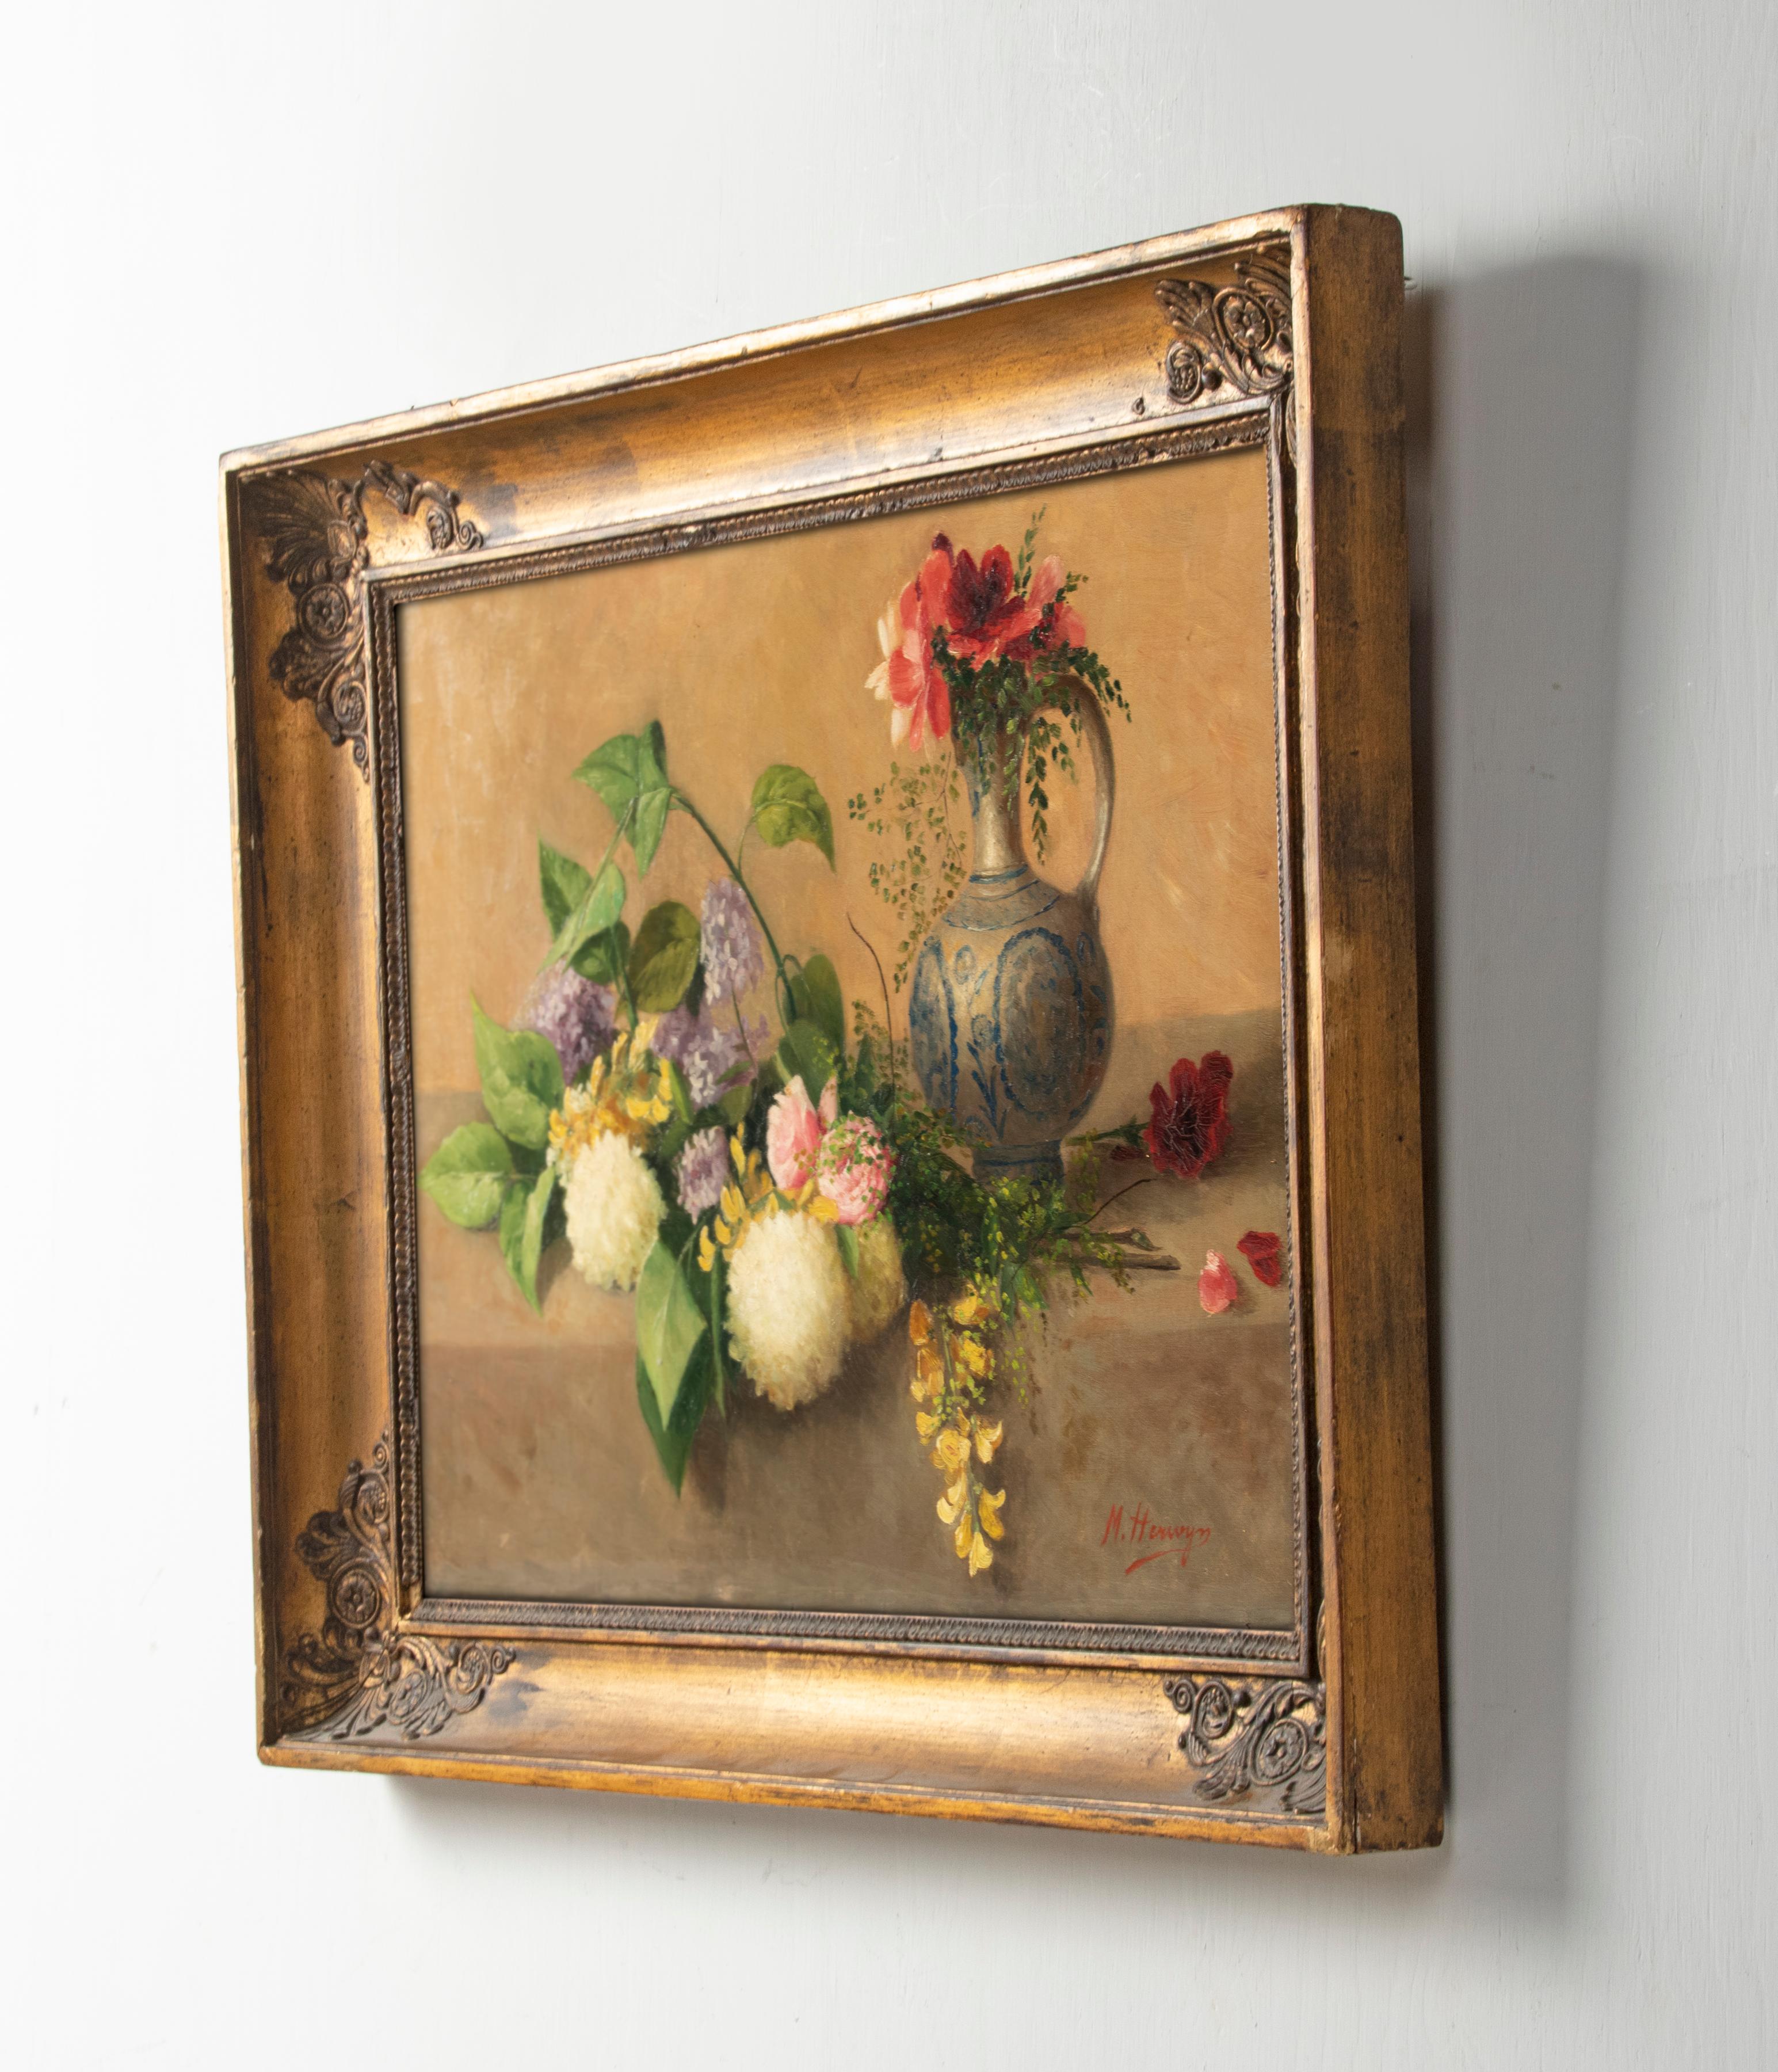 Late 19th Century 19th Century Flower Still Life Painting Oil on Canvas by M. Herwyn